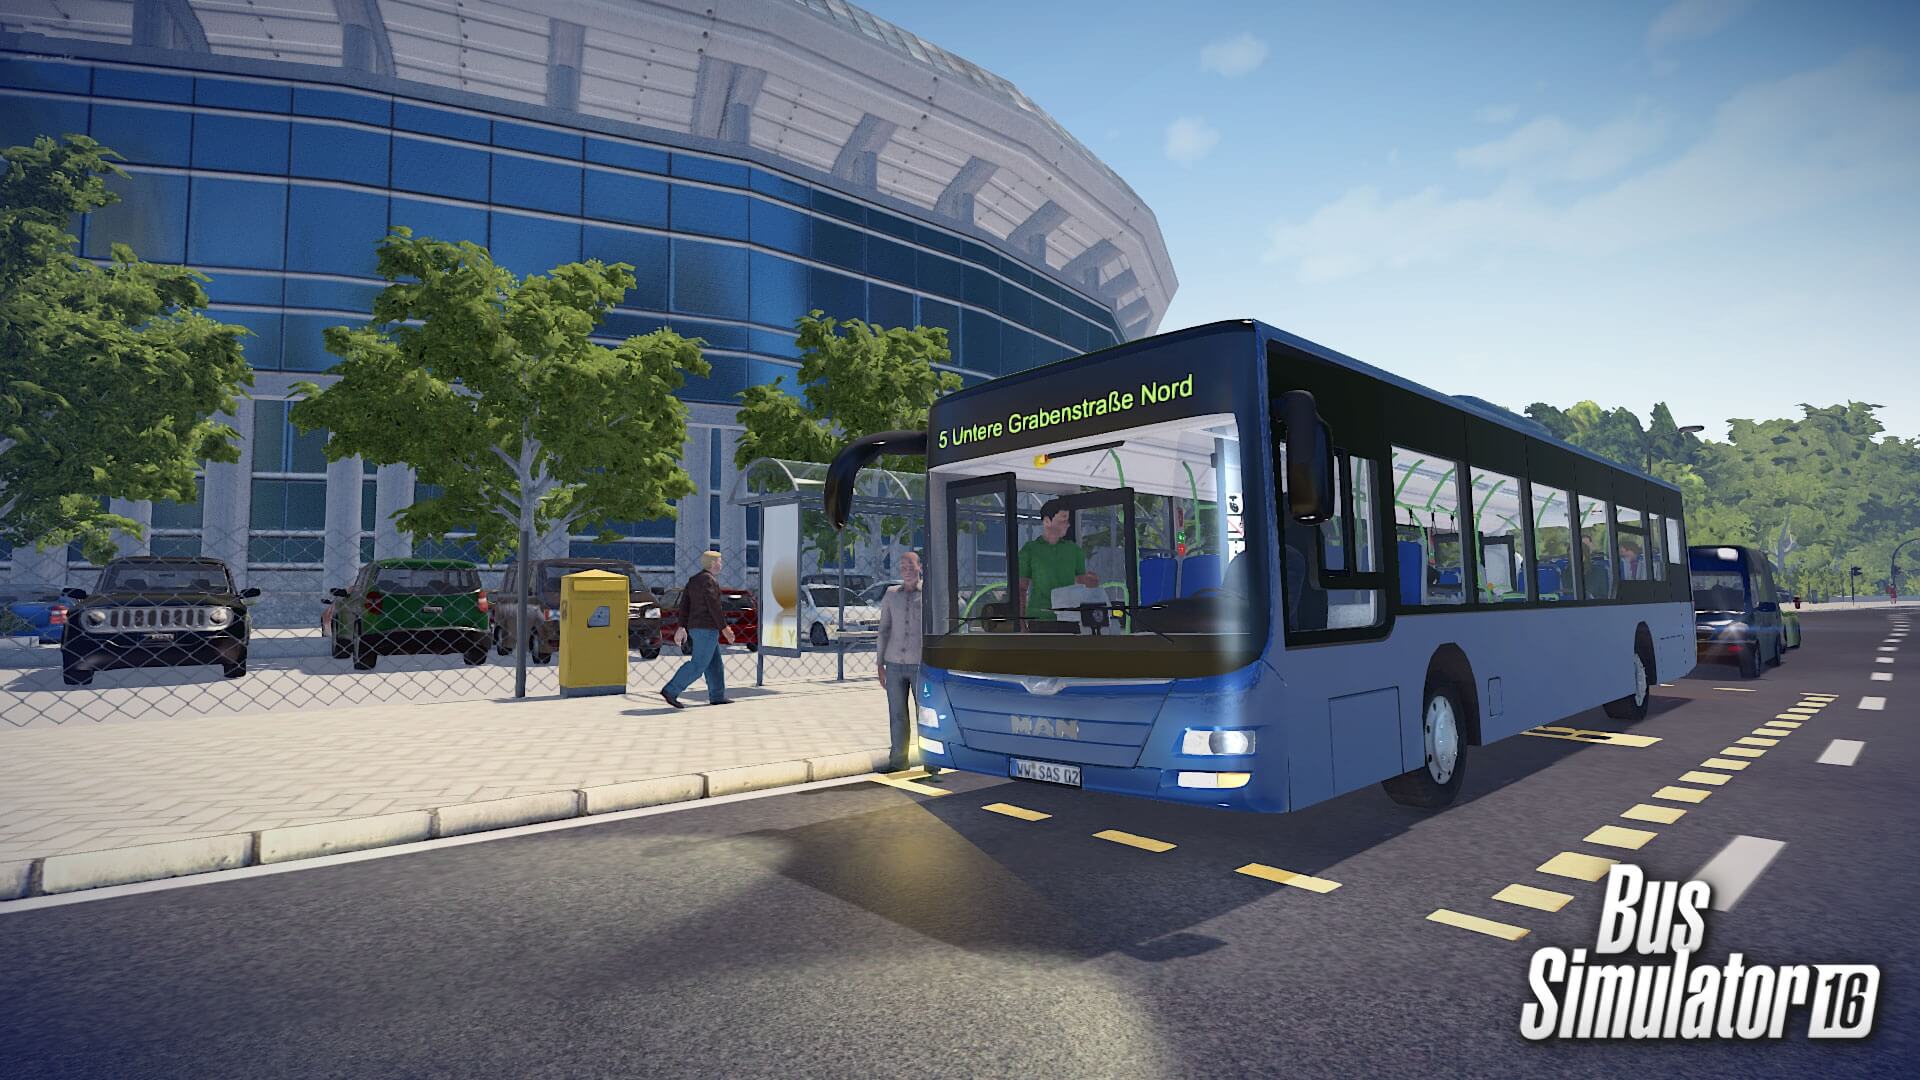 BUS SIMULATOR 2016 FULL GAME HIGHLY COMPRESSED FOR PC IN 500 MB PARTS - TRAX GAMING CENTER